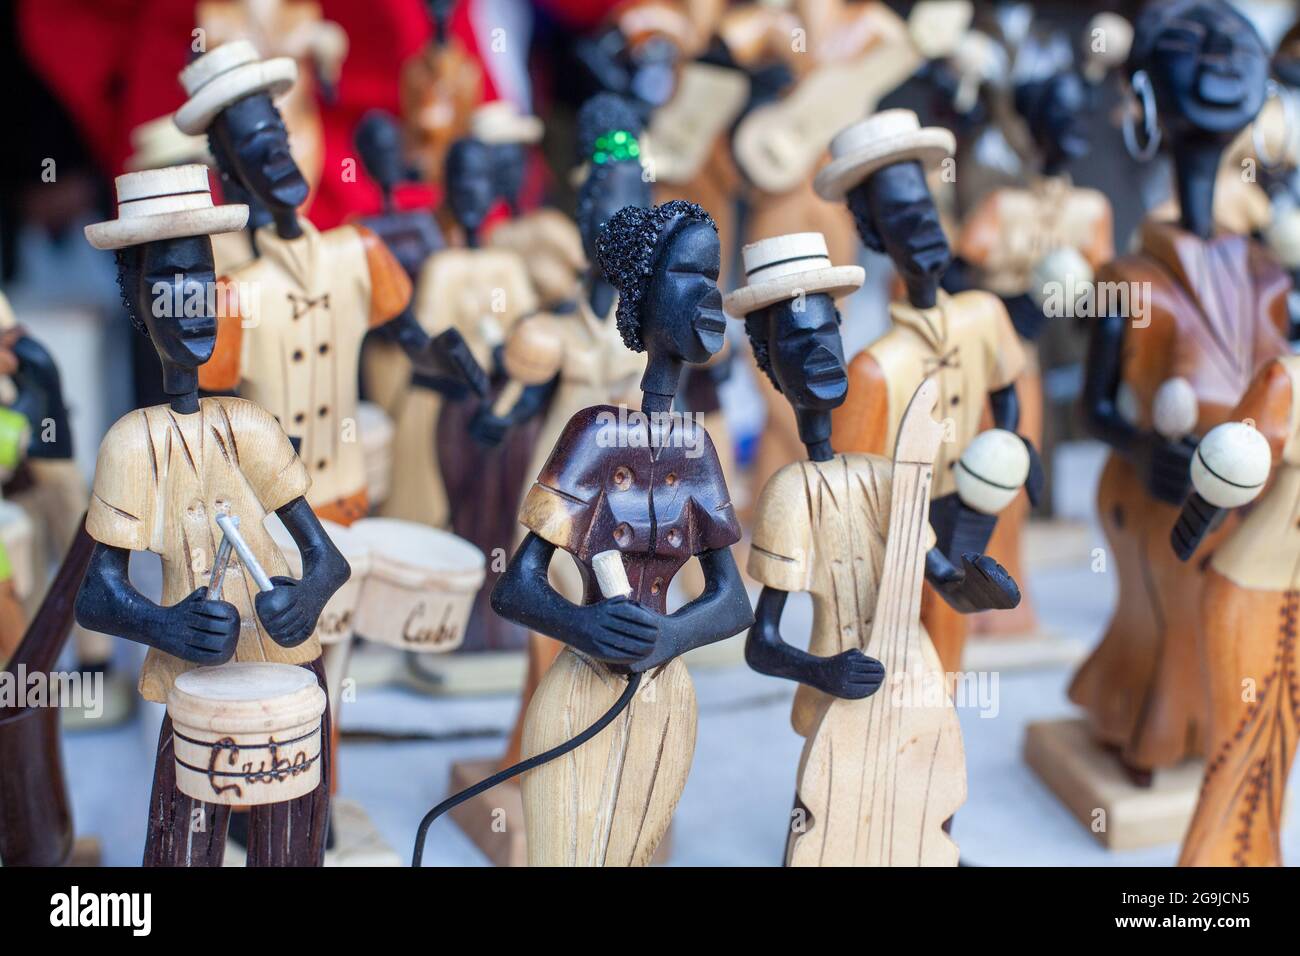 Cuban Tourist Souvenirs Wood Carved Singing Band Cuba Singer With Her Musicians For Sale In A Varadero Tourist Market Cuba Stock Photo